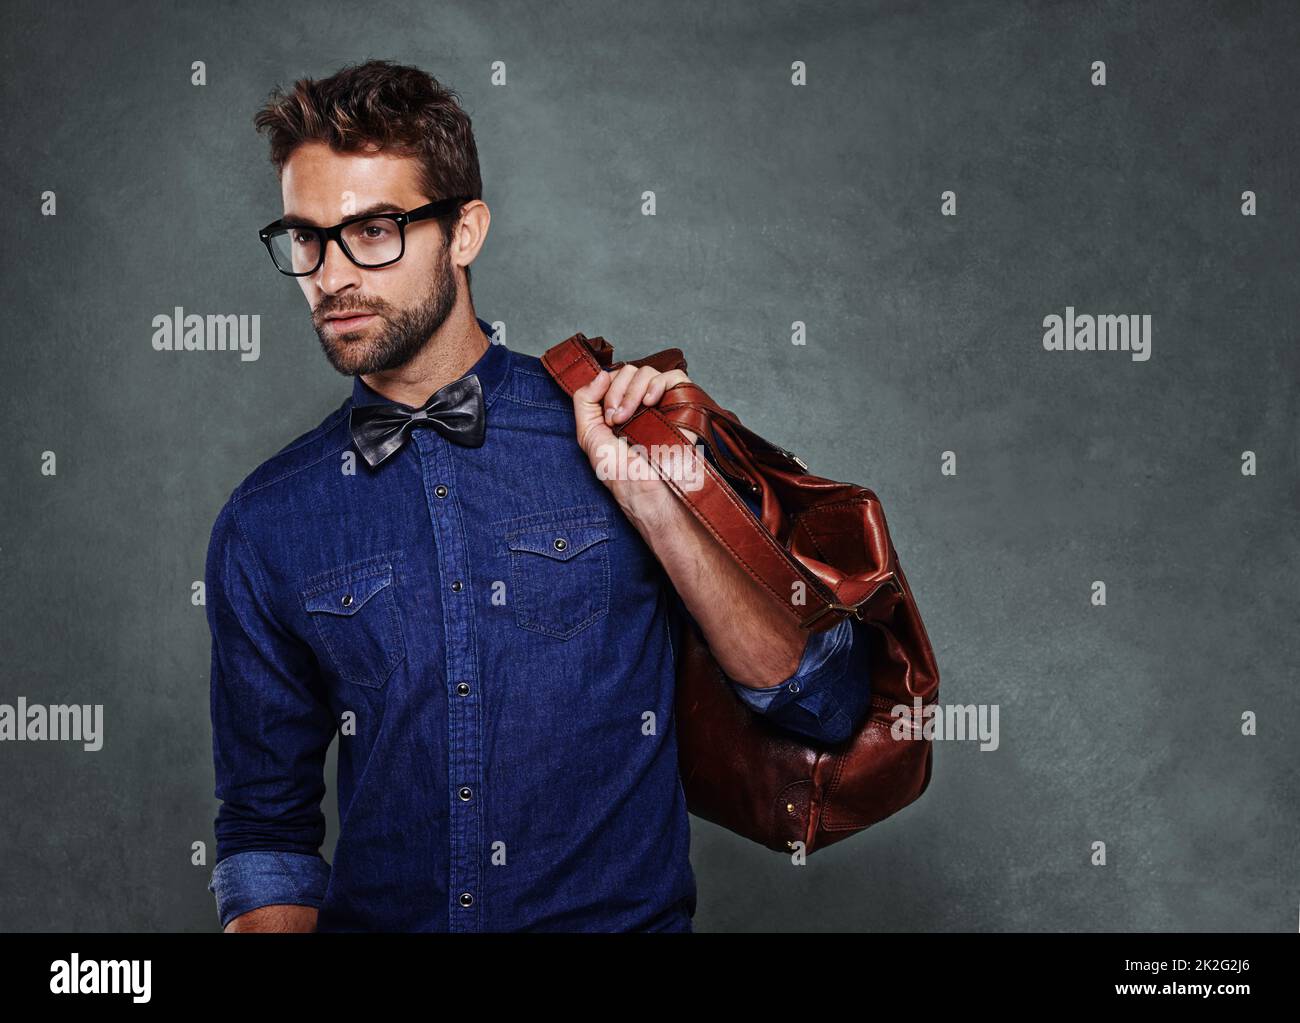 Im all about style. Studio shot of a stylishly dressed young man. Stock Photo